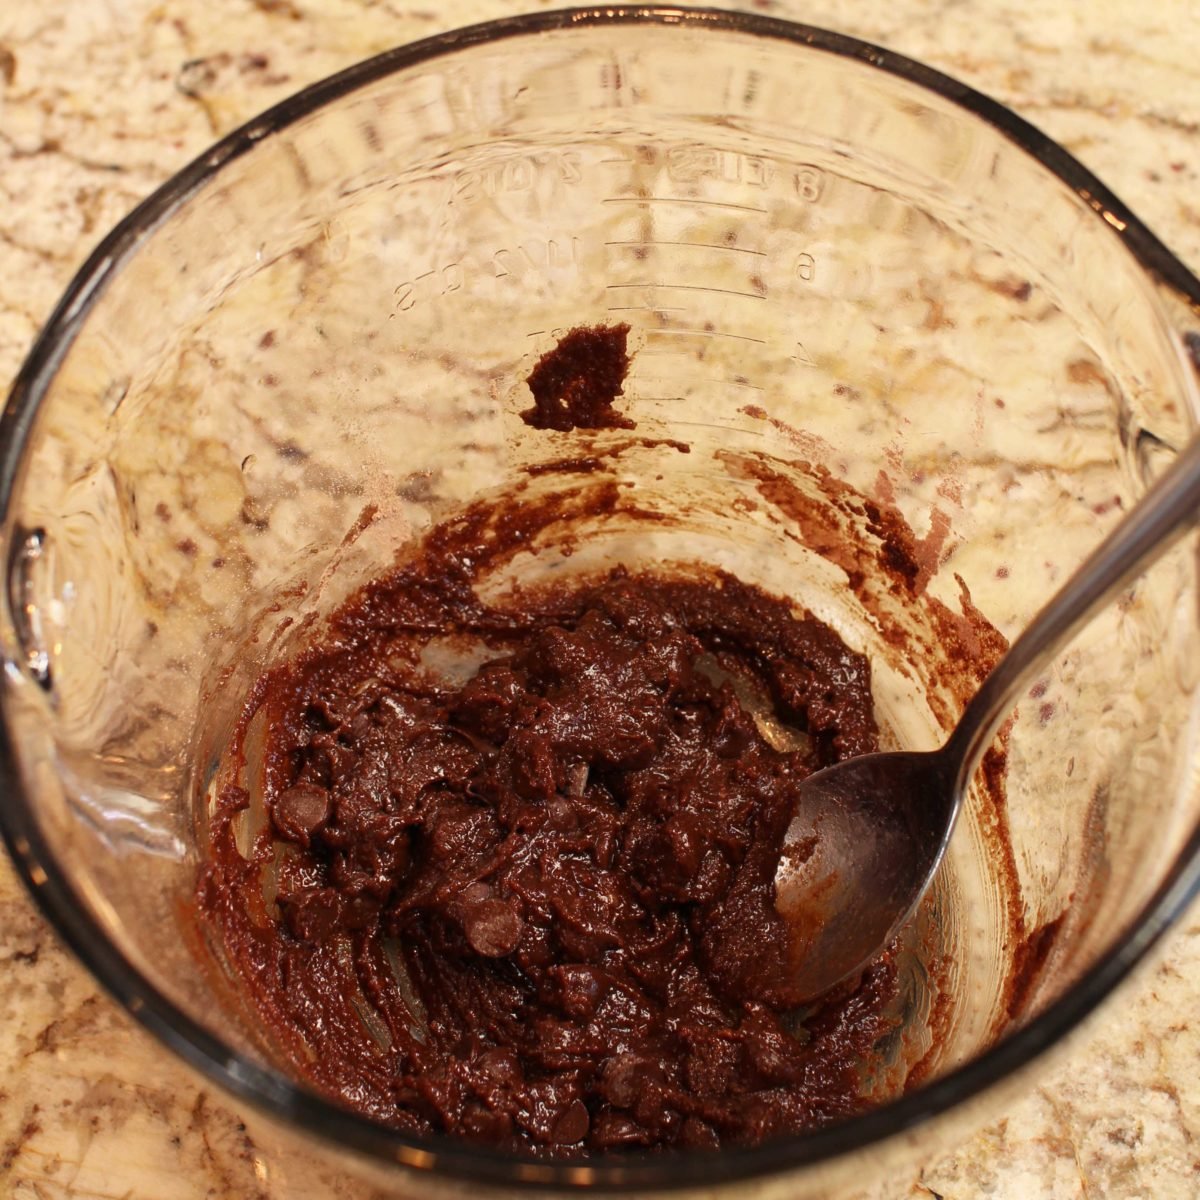 brownie batter in a mixing bowl with chocolate chips mixed in.